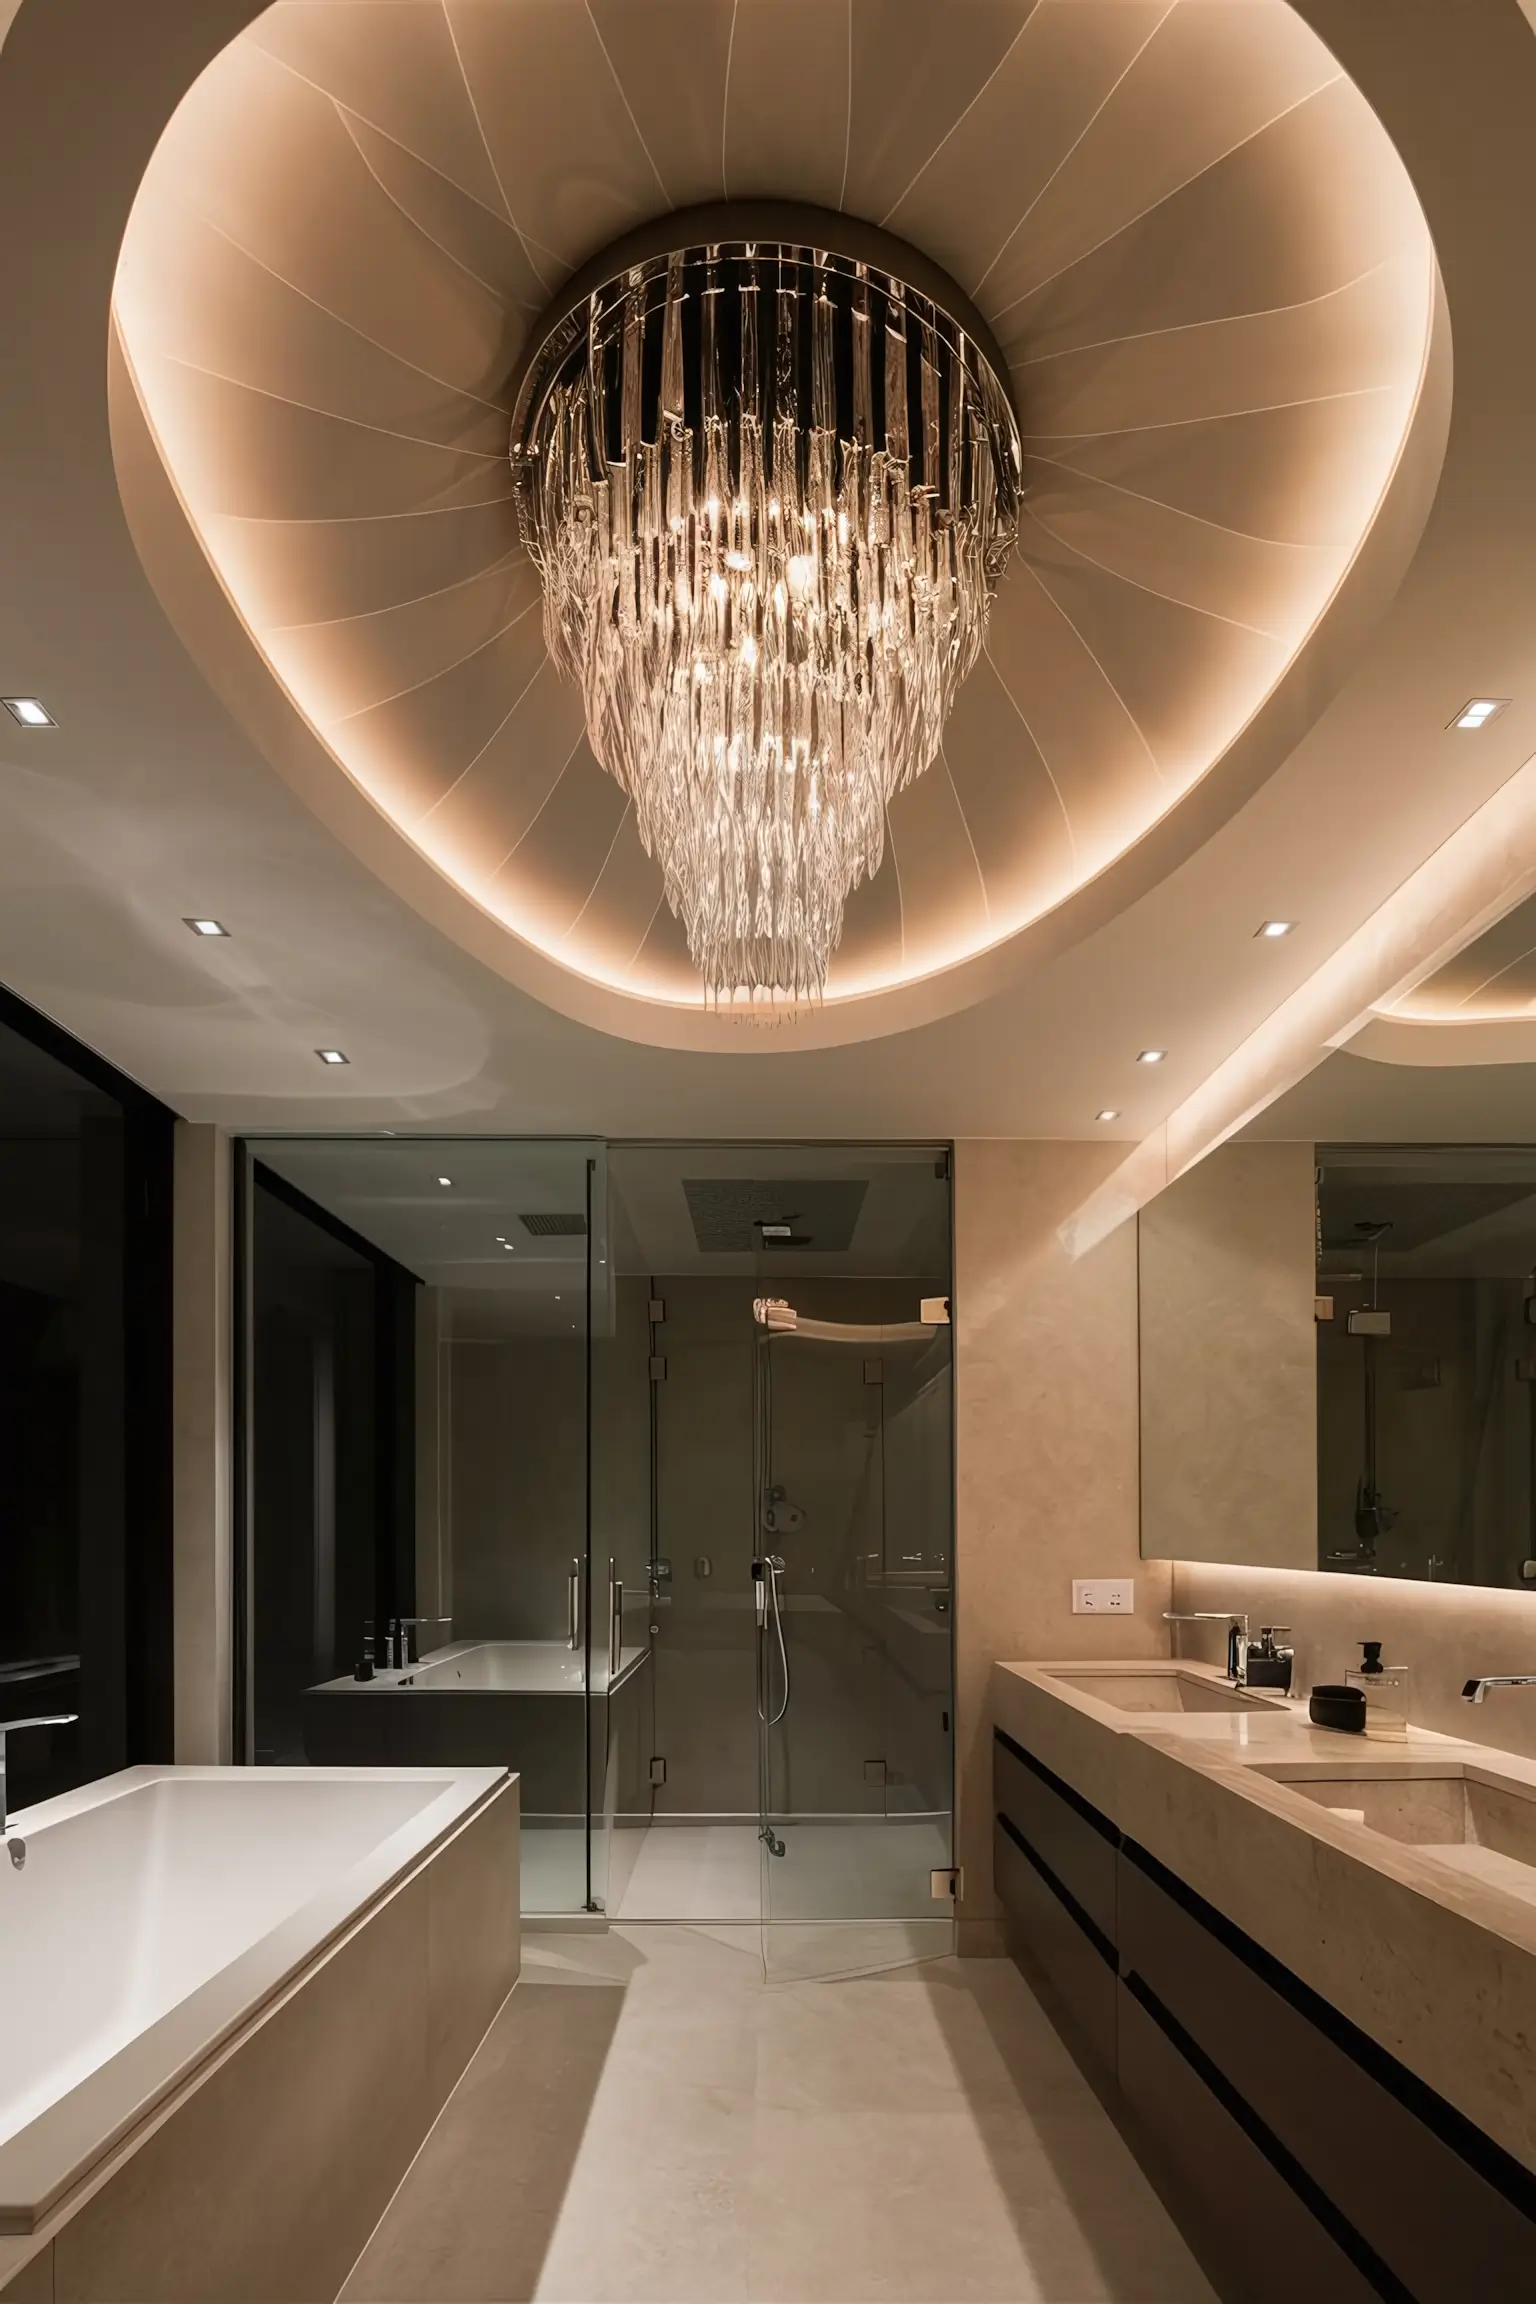 Bathroom with innovative ceiling lighting including recessed lights and a statement chandelier.